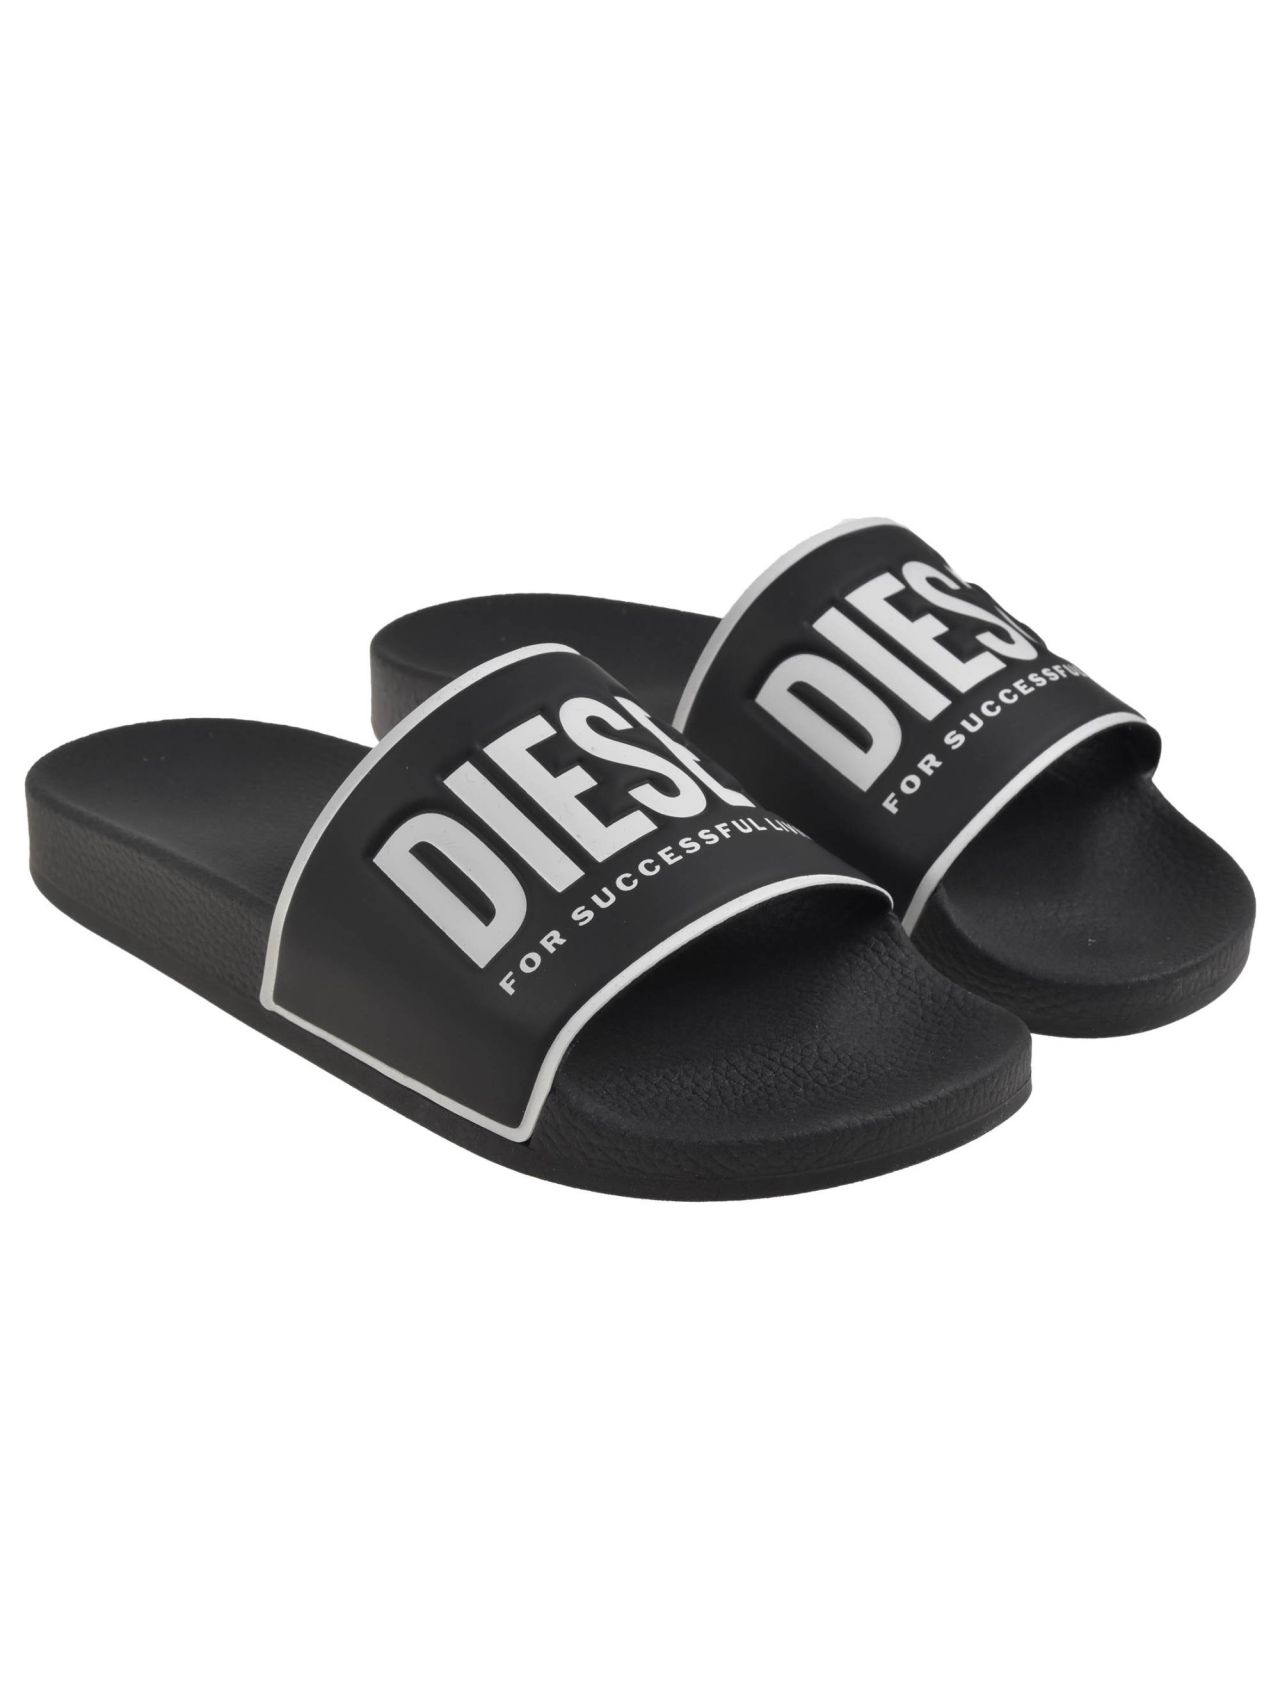 Share more than 131 diesel mens slippers